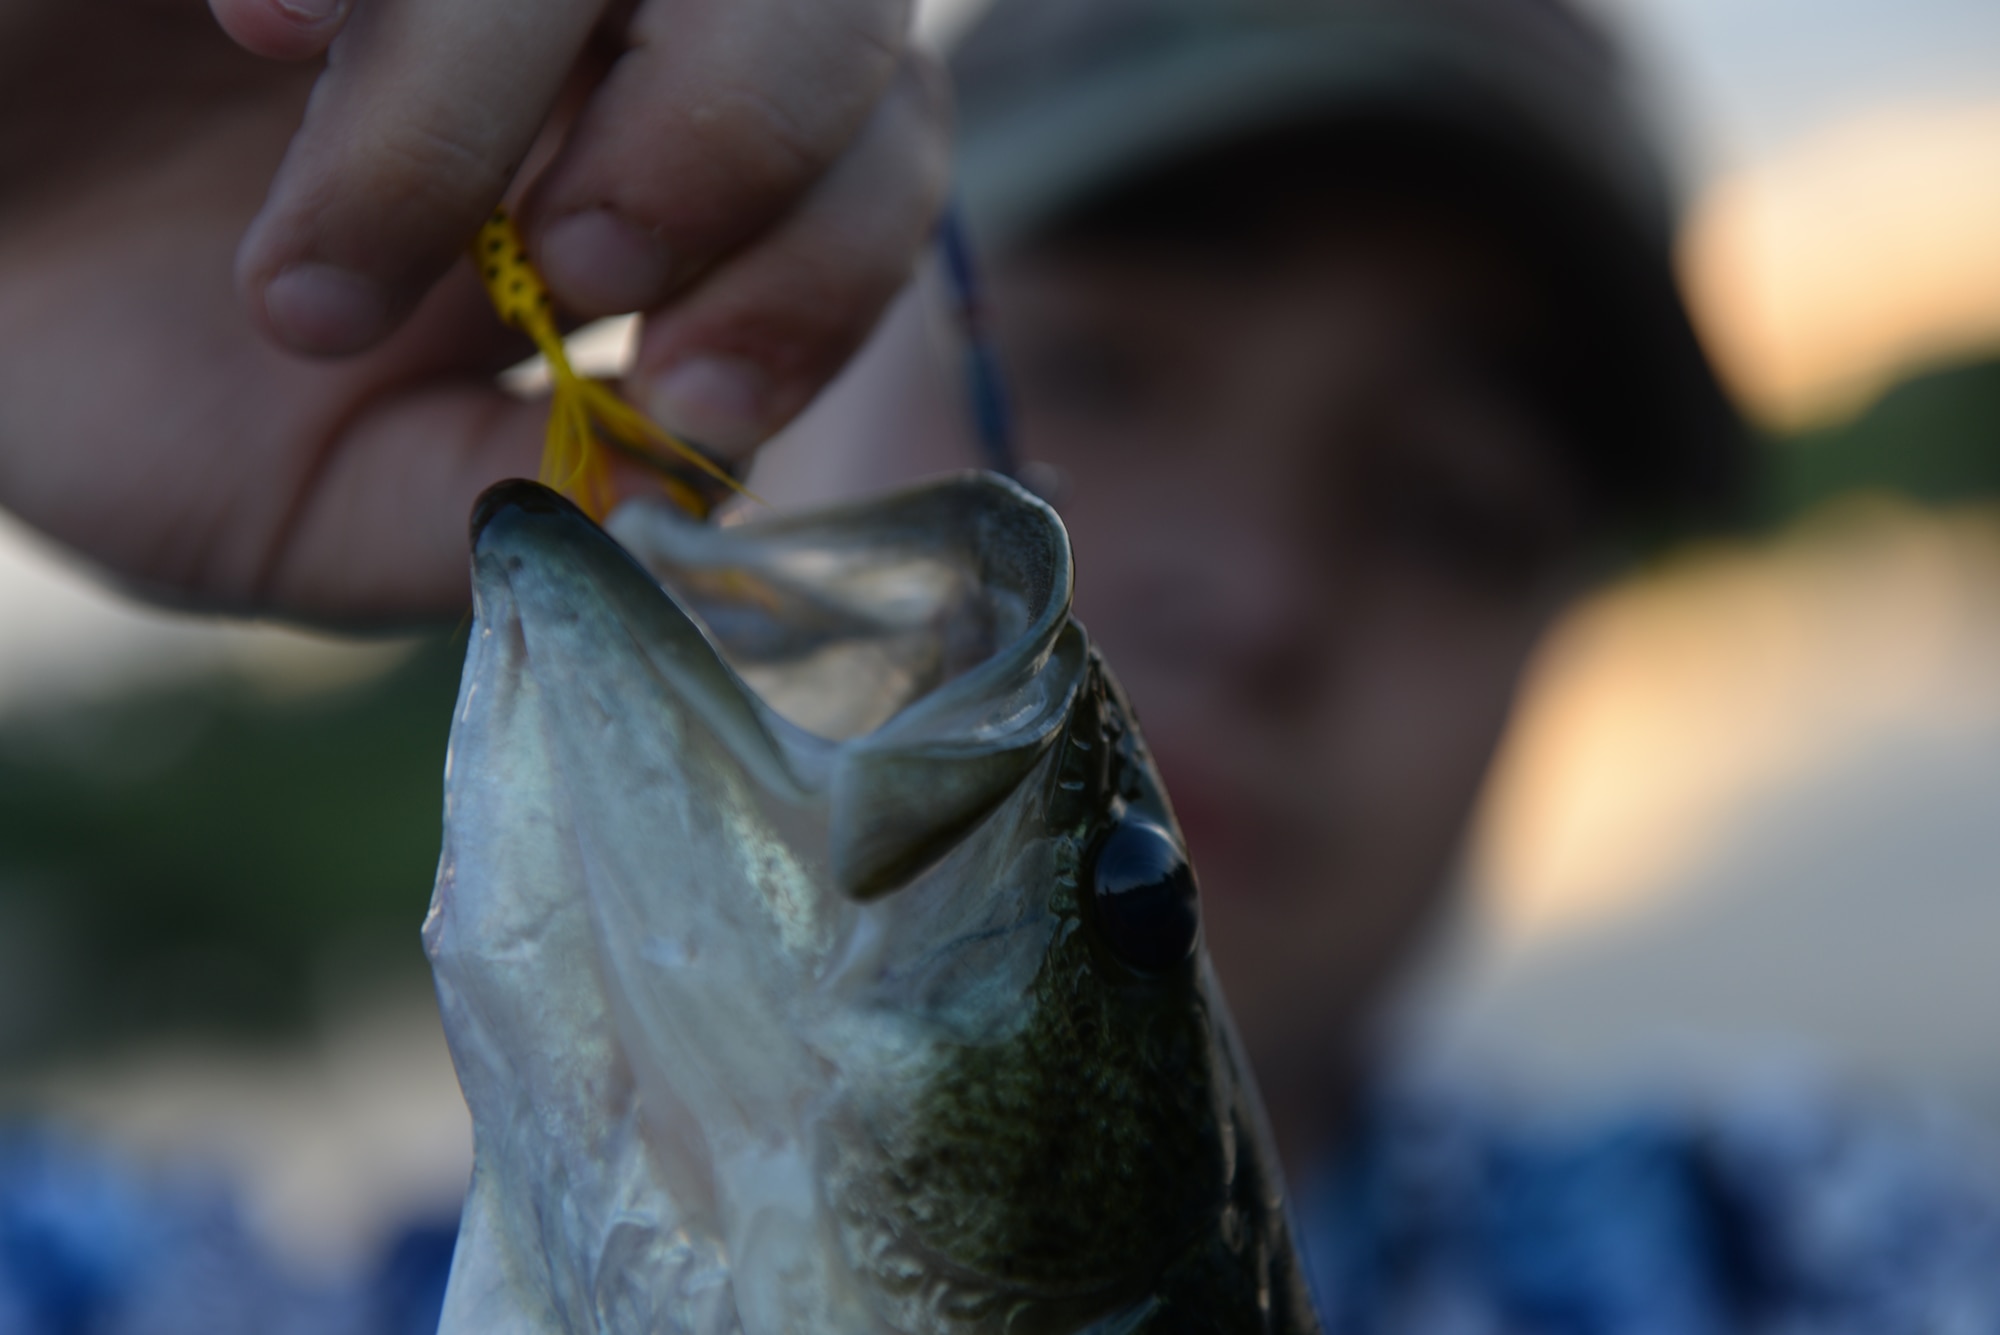 Airman John Ennis, a 28th Bomb Wing Public Affairs broadcast journalist, unhooks a bass caught at Gateway Lake on Ellsworth Air Force Base, S.D., July 12, 2018. Fish in the lakes include, but are not limited to, largemouth bass, rainbow trout, bluegill, perch, crappie, green sunfish and red sunfish. (U.S. Air Force photo by Airman 1st Class Nicolas Z. Erwin)